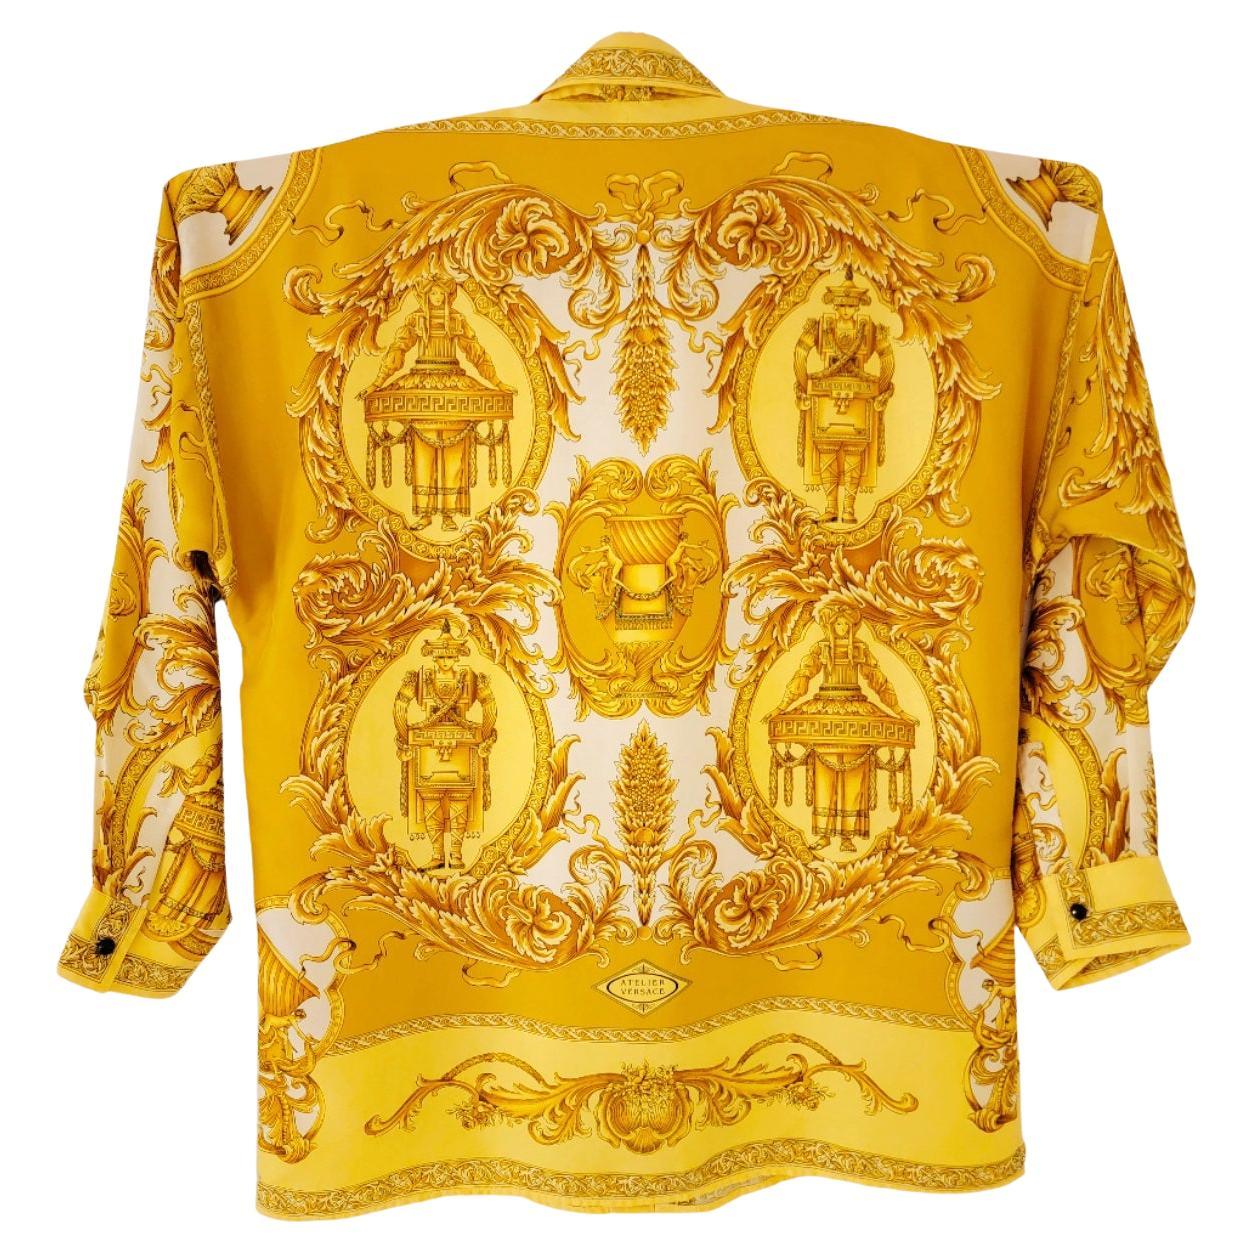 Gianni Versace Rococo Silk Shirt Men’s IT48 from 1995 For Sale